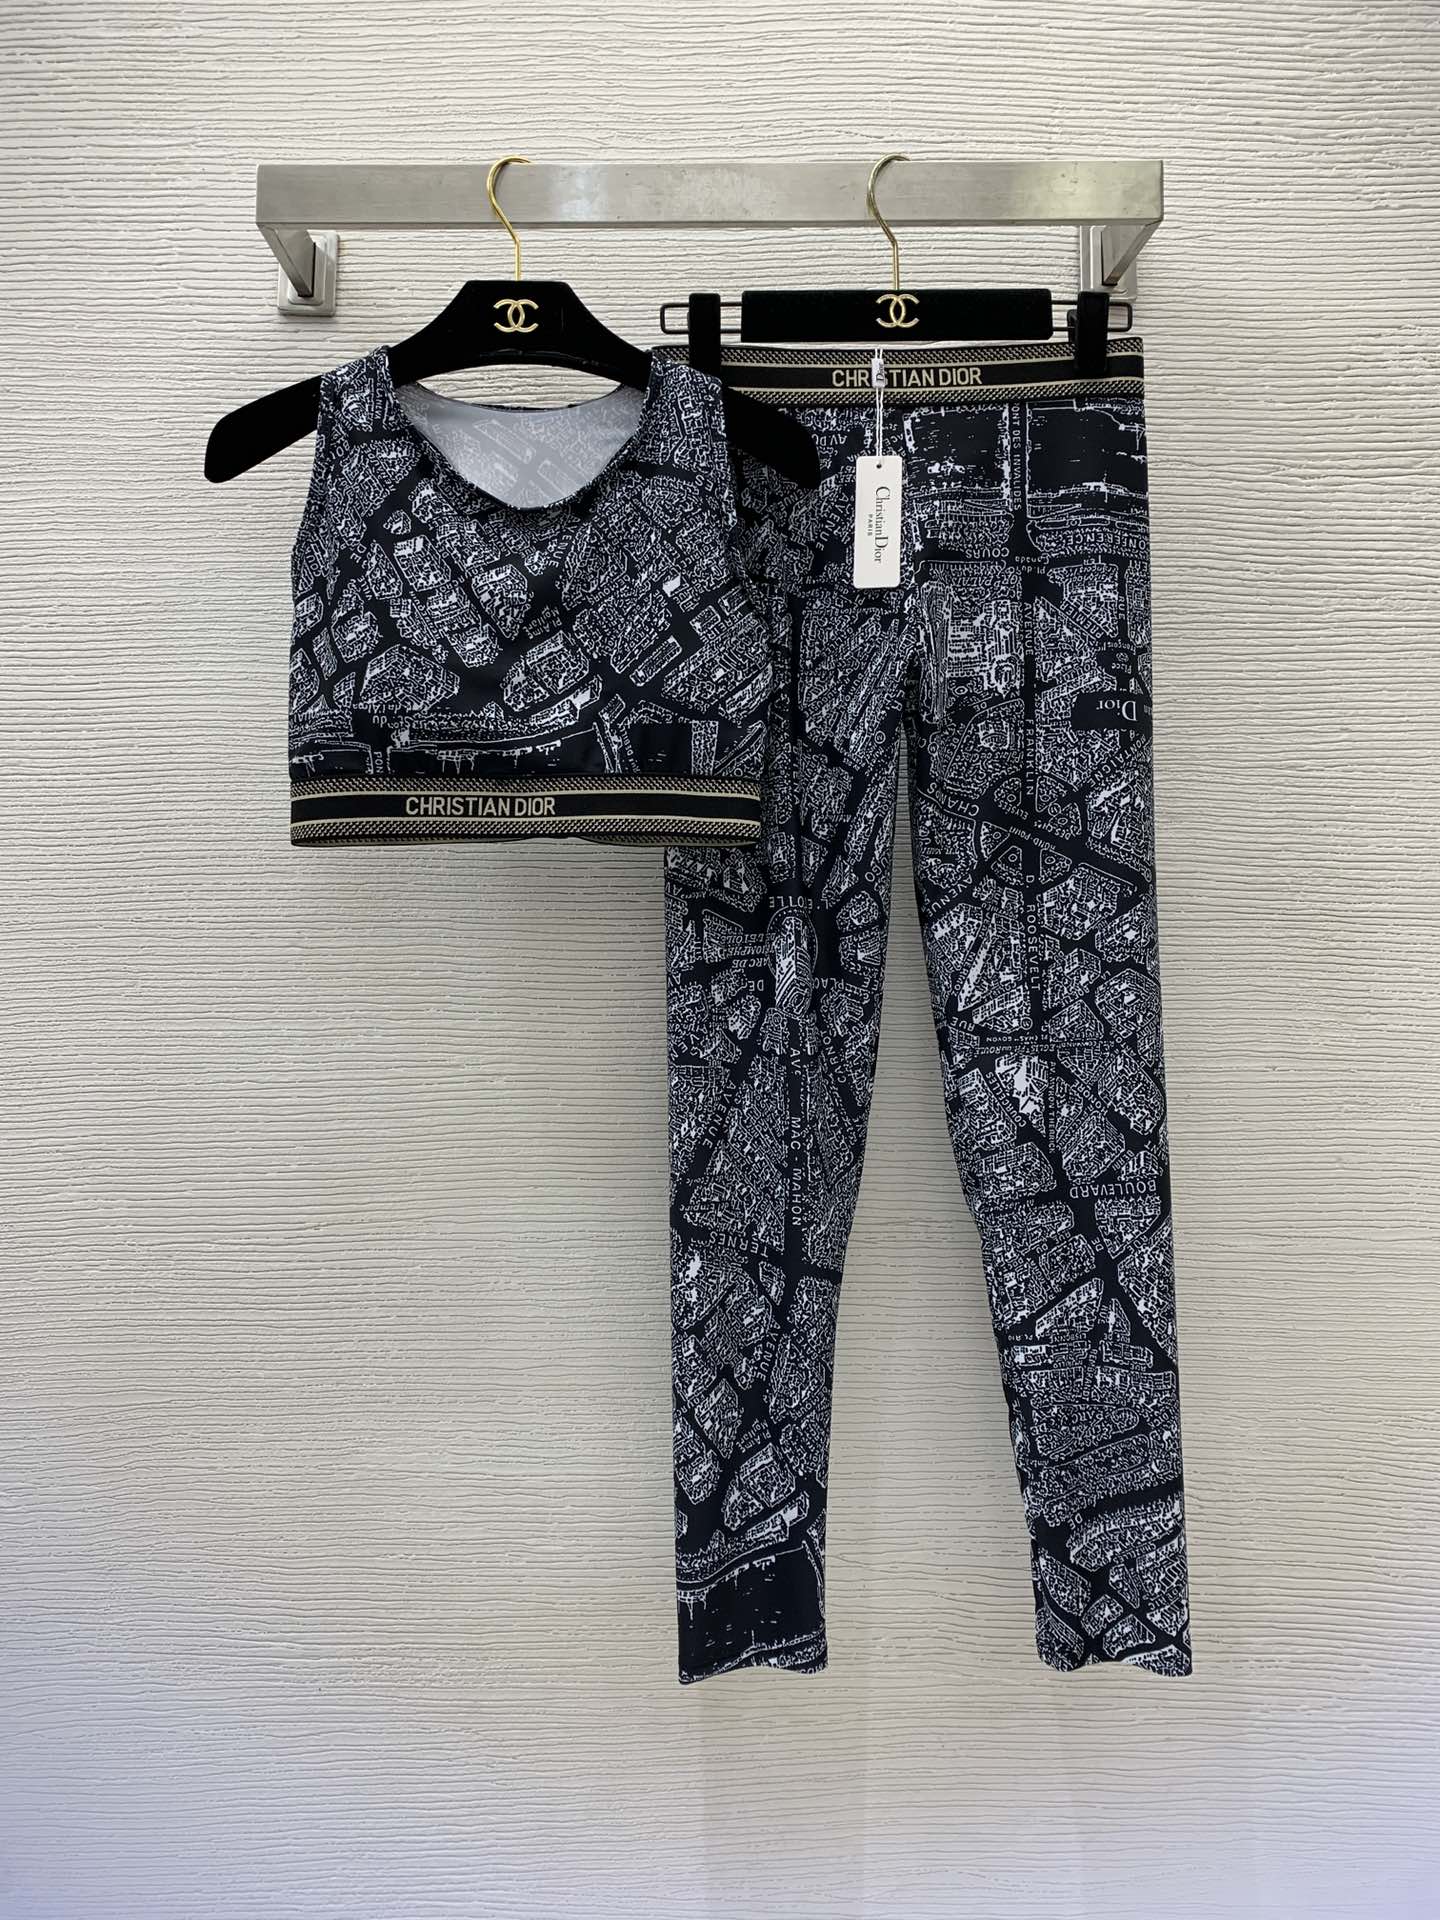 Dior Clothing Shirts & Blouses Tank Top Two Piece Outfits & Matching Sets Yoga Clothes Black Blue White Printing Spring/Summer Collection Sweatpants